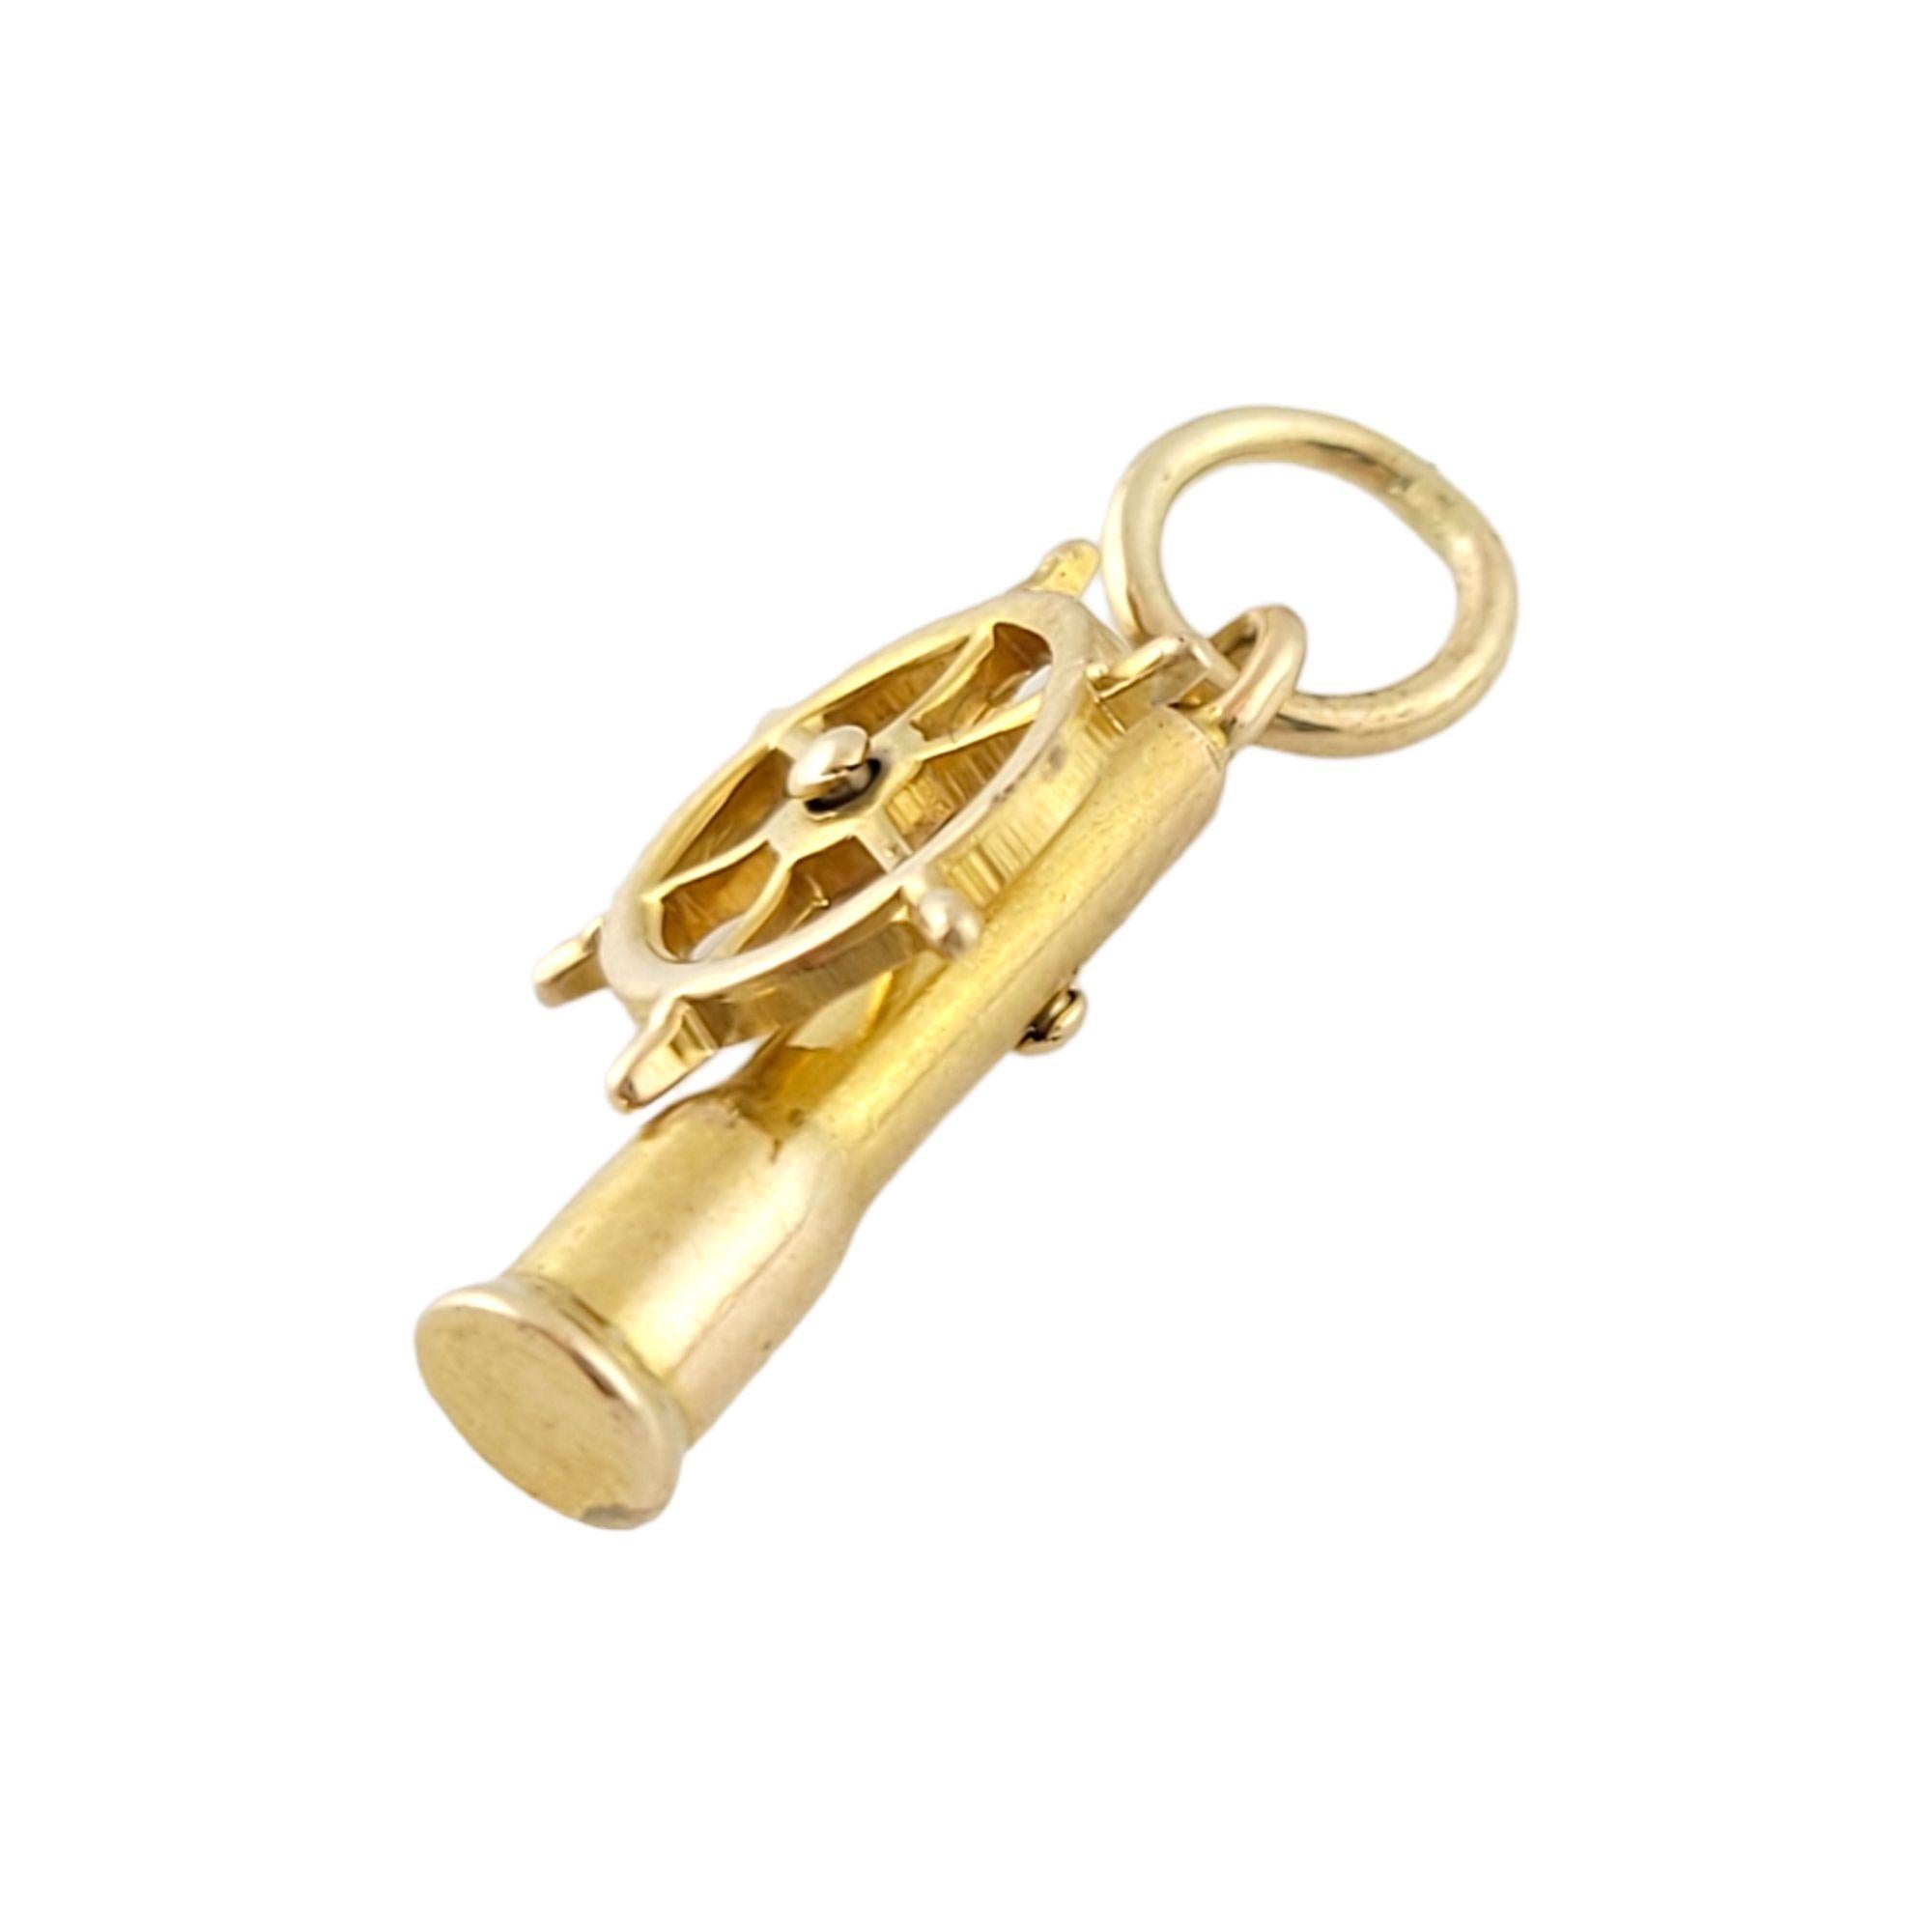 This adorable 14K gold boat steering wheel charm makes the perfect gift for any boat lovers!

Size: 16mm X 11mm X 5mm

Length w/ bail: 20mm

Weight: 0.9 g/ 0.5 dwt

Tested 14K

Very good condition, professionally polished.

Will come packaged in a